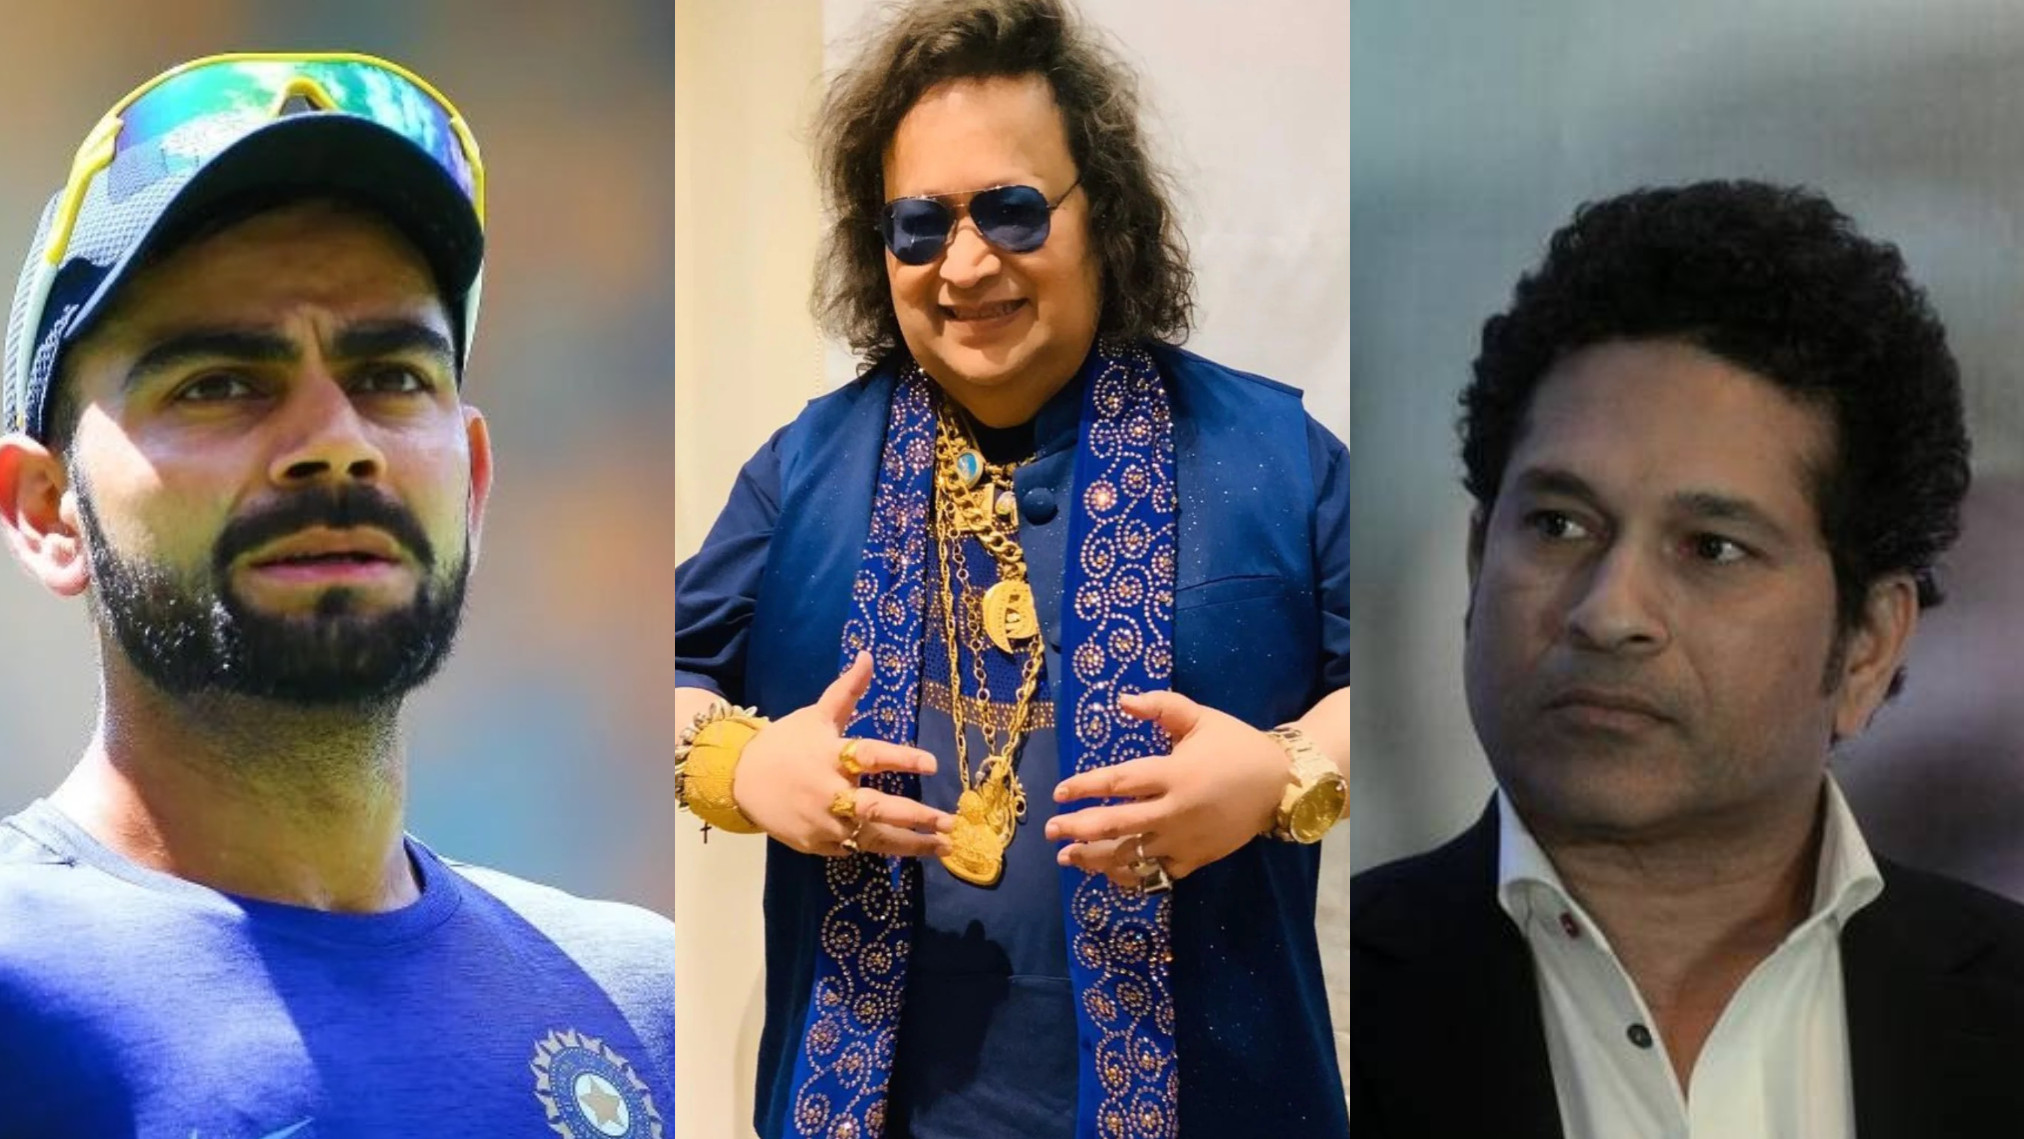 Indian cricket fraternity pays tribute to music composer Bappi Lahiri who passed away at 69